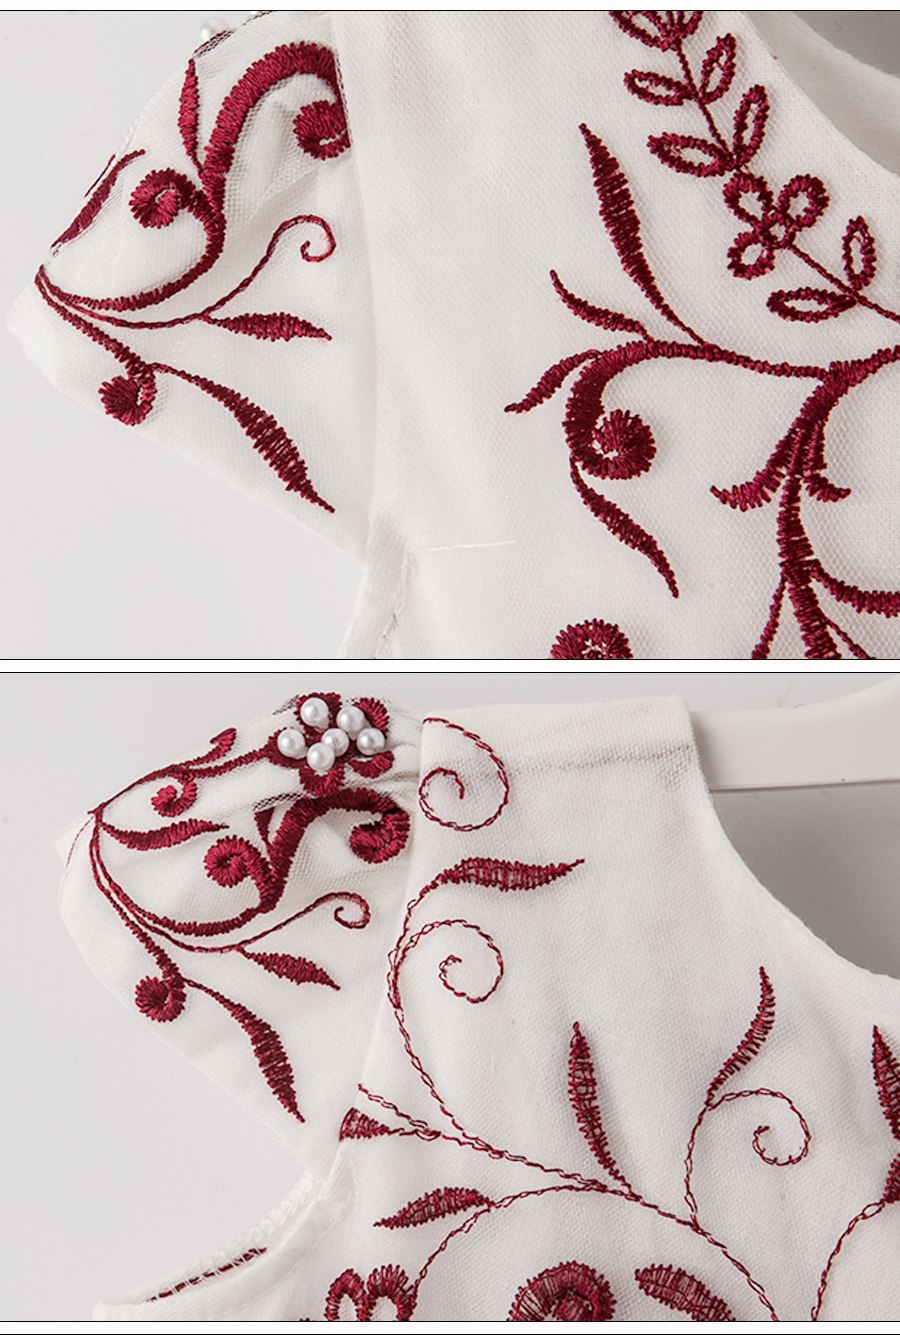 White Embroidered Dress, Size 3-10Yrs